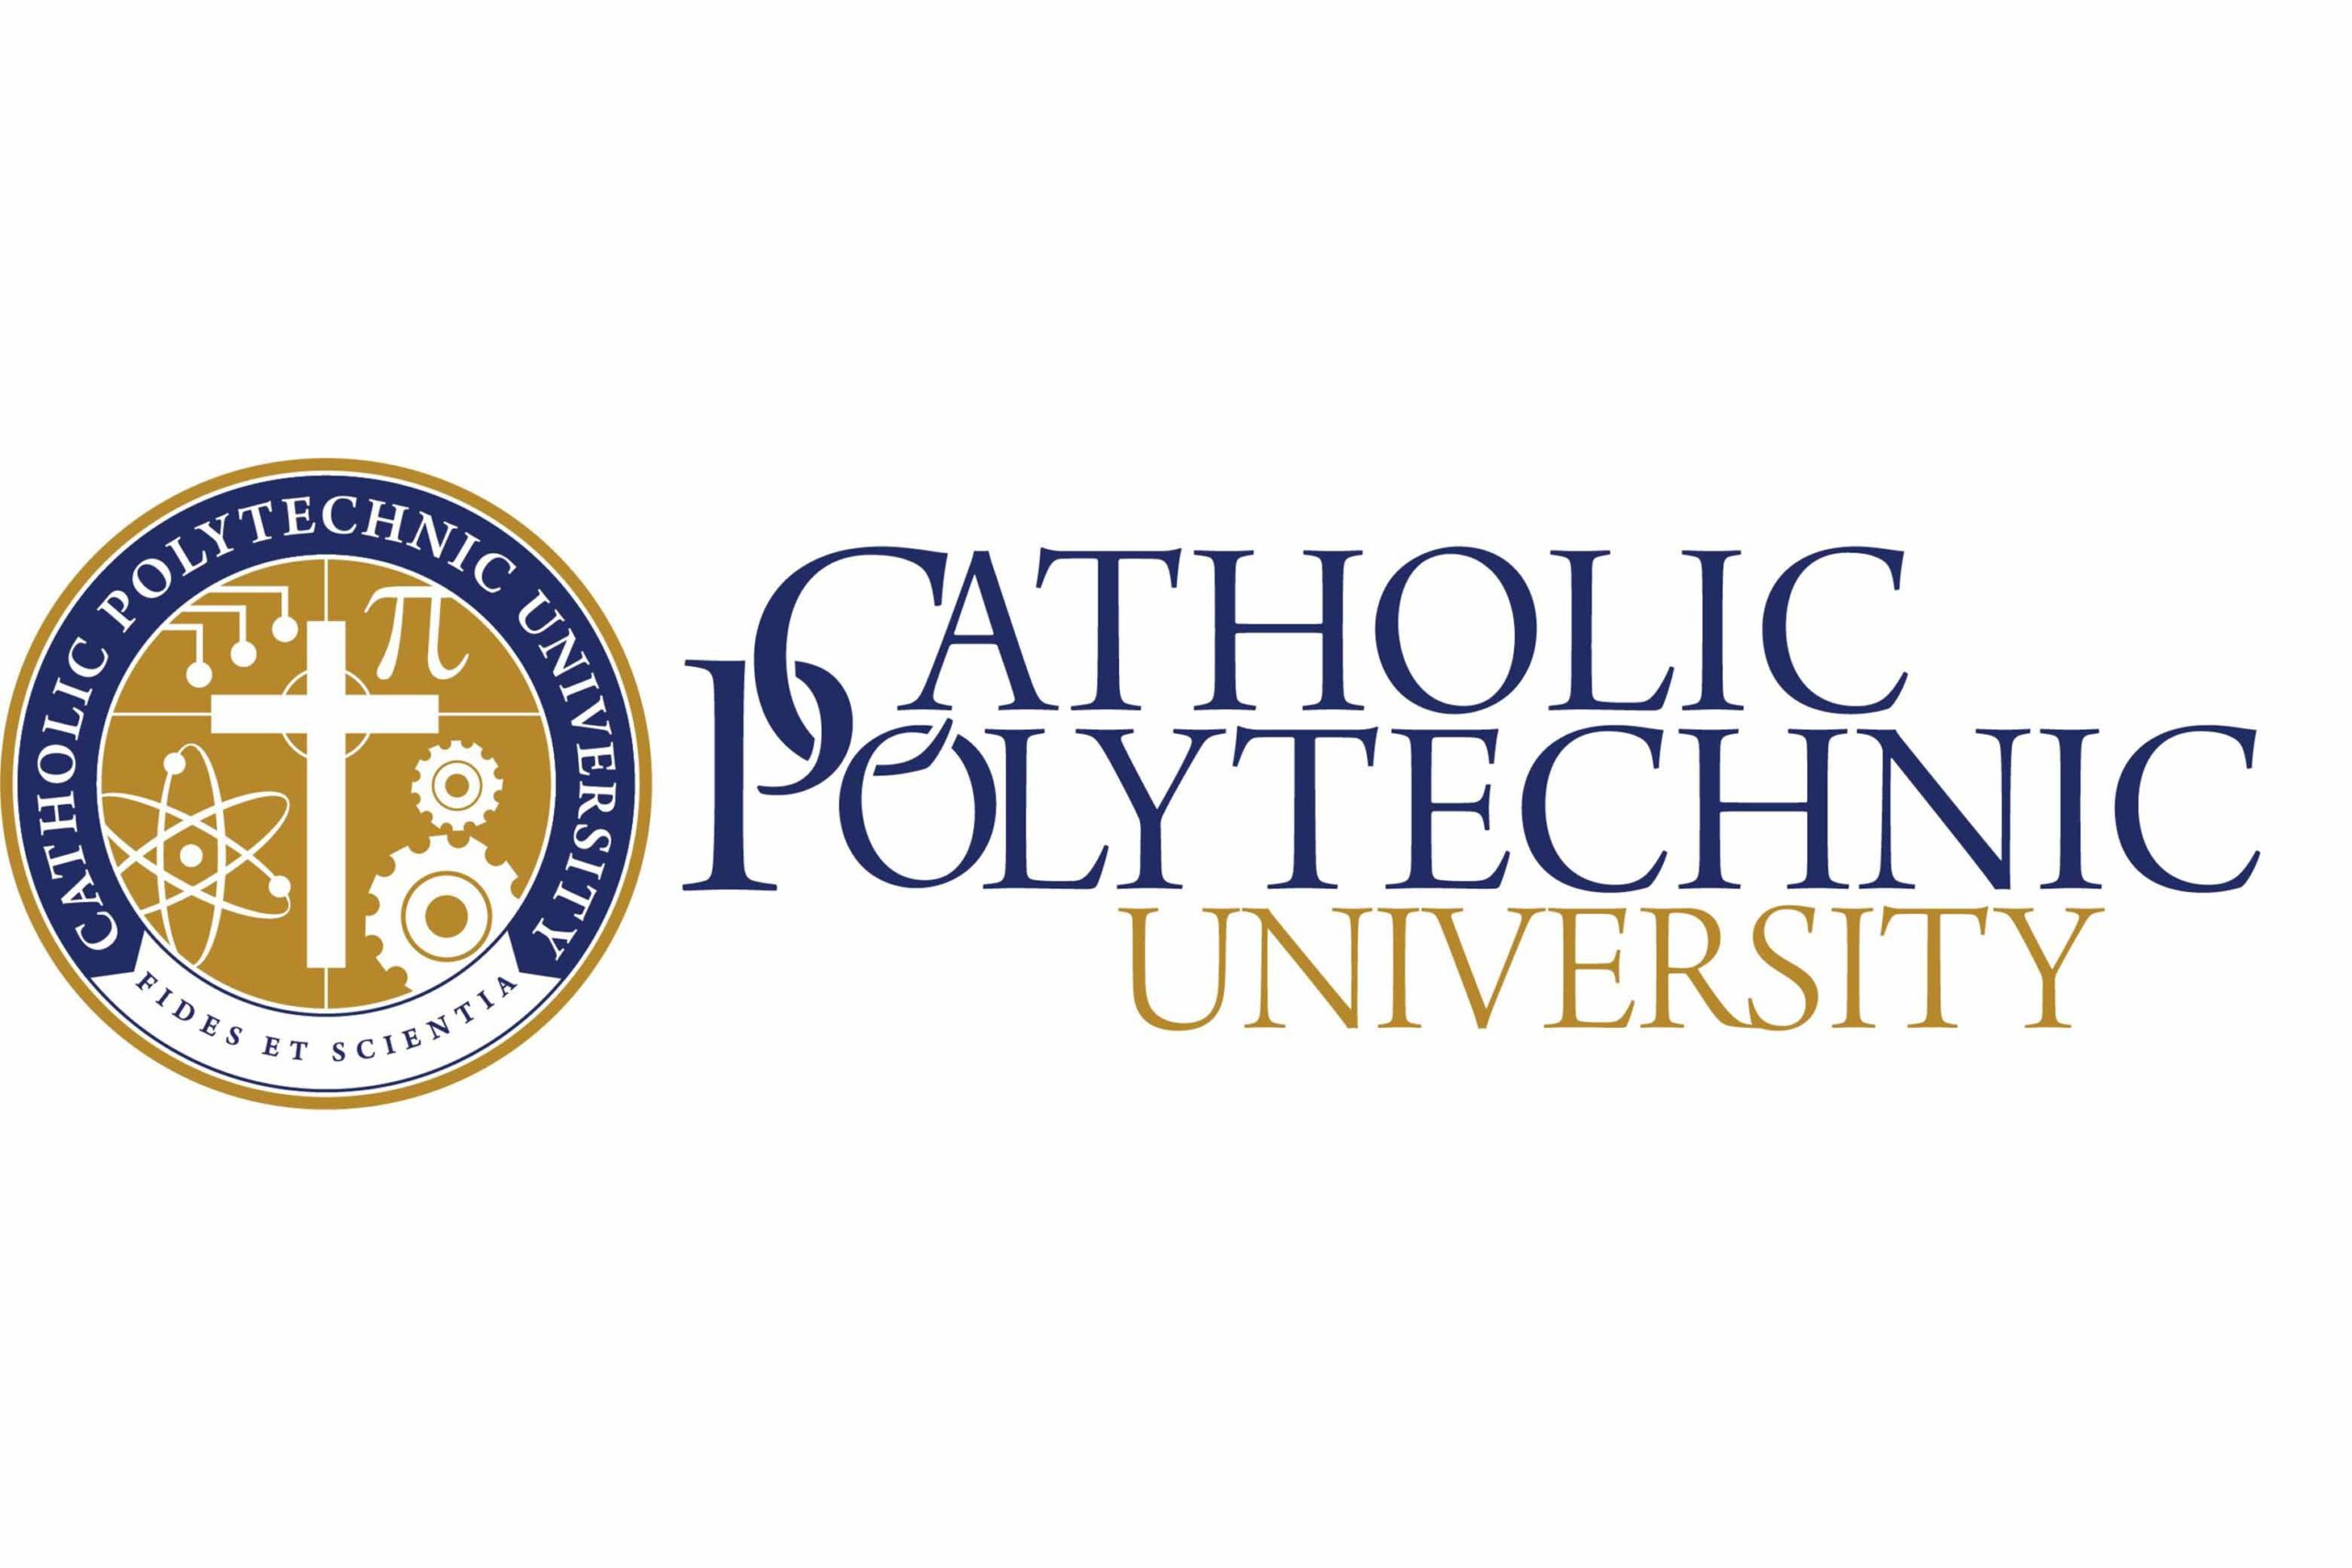 New ‘deeply Catholic’ college focused on science and tech receives completely ready to launch